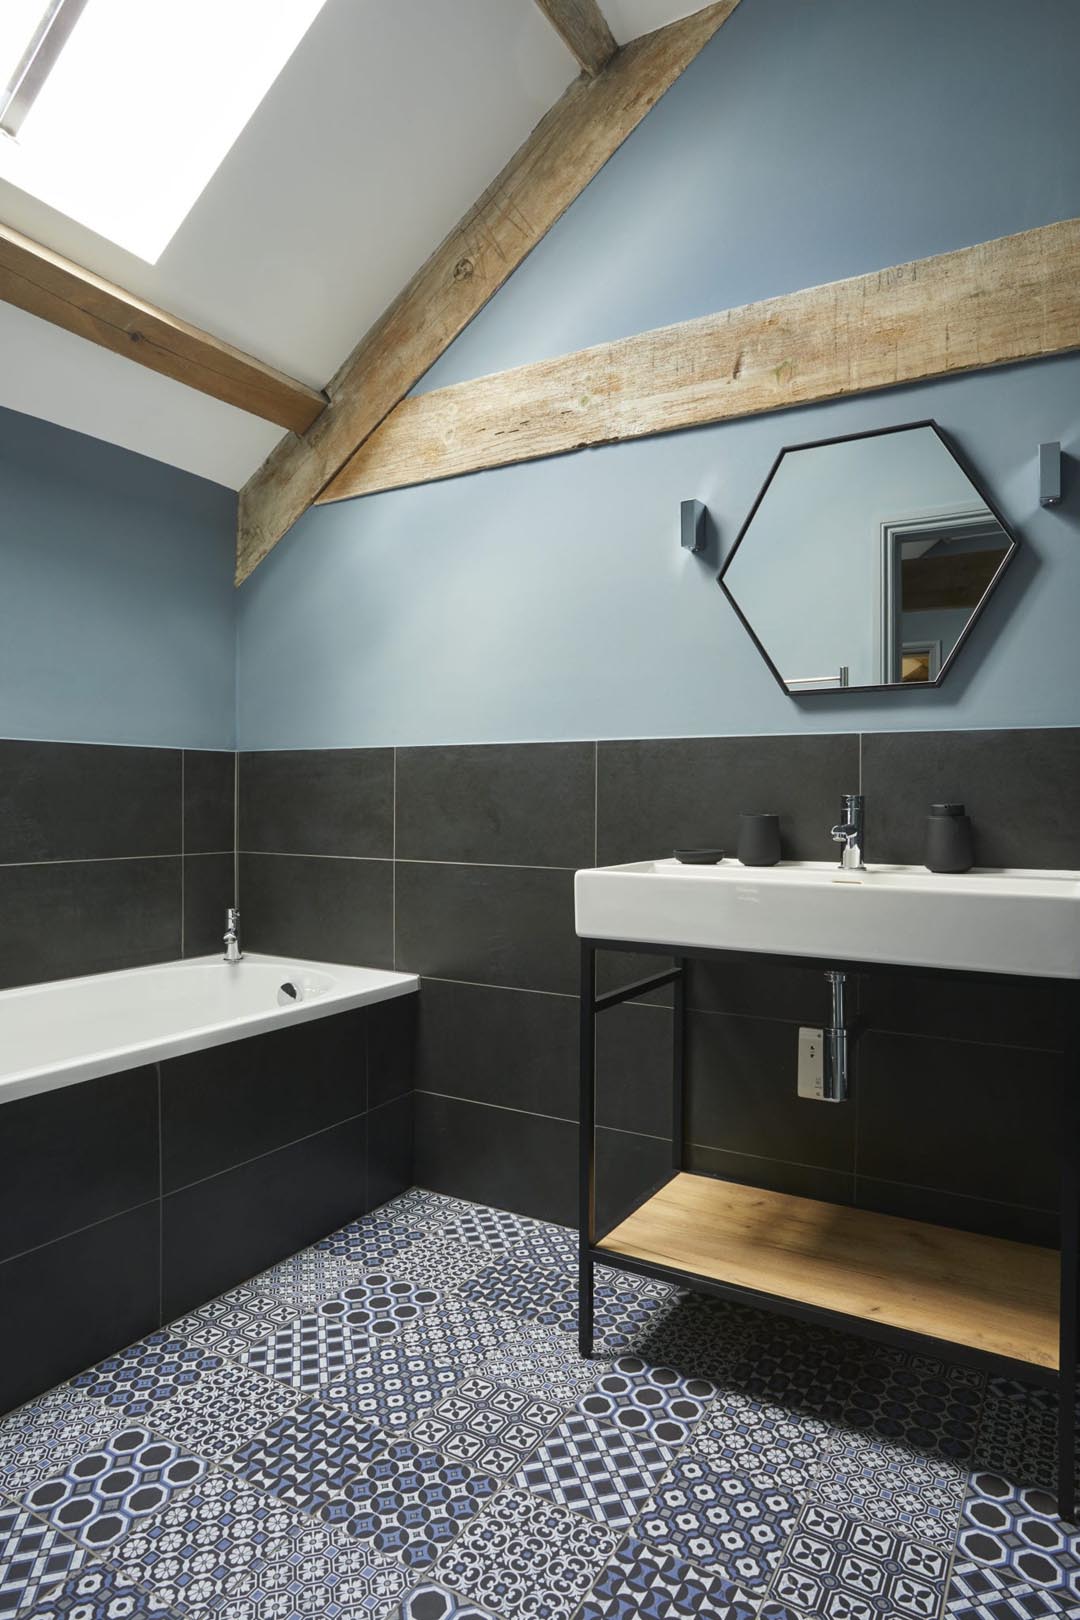 The Stables en suite bathroom with wooden rafters